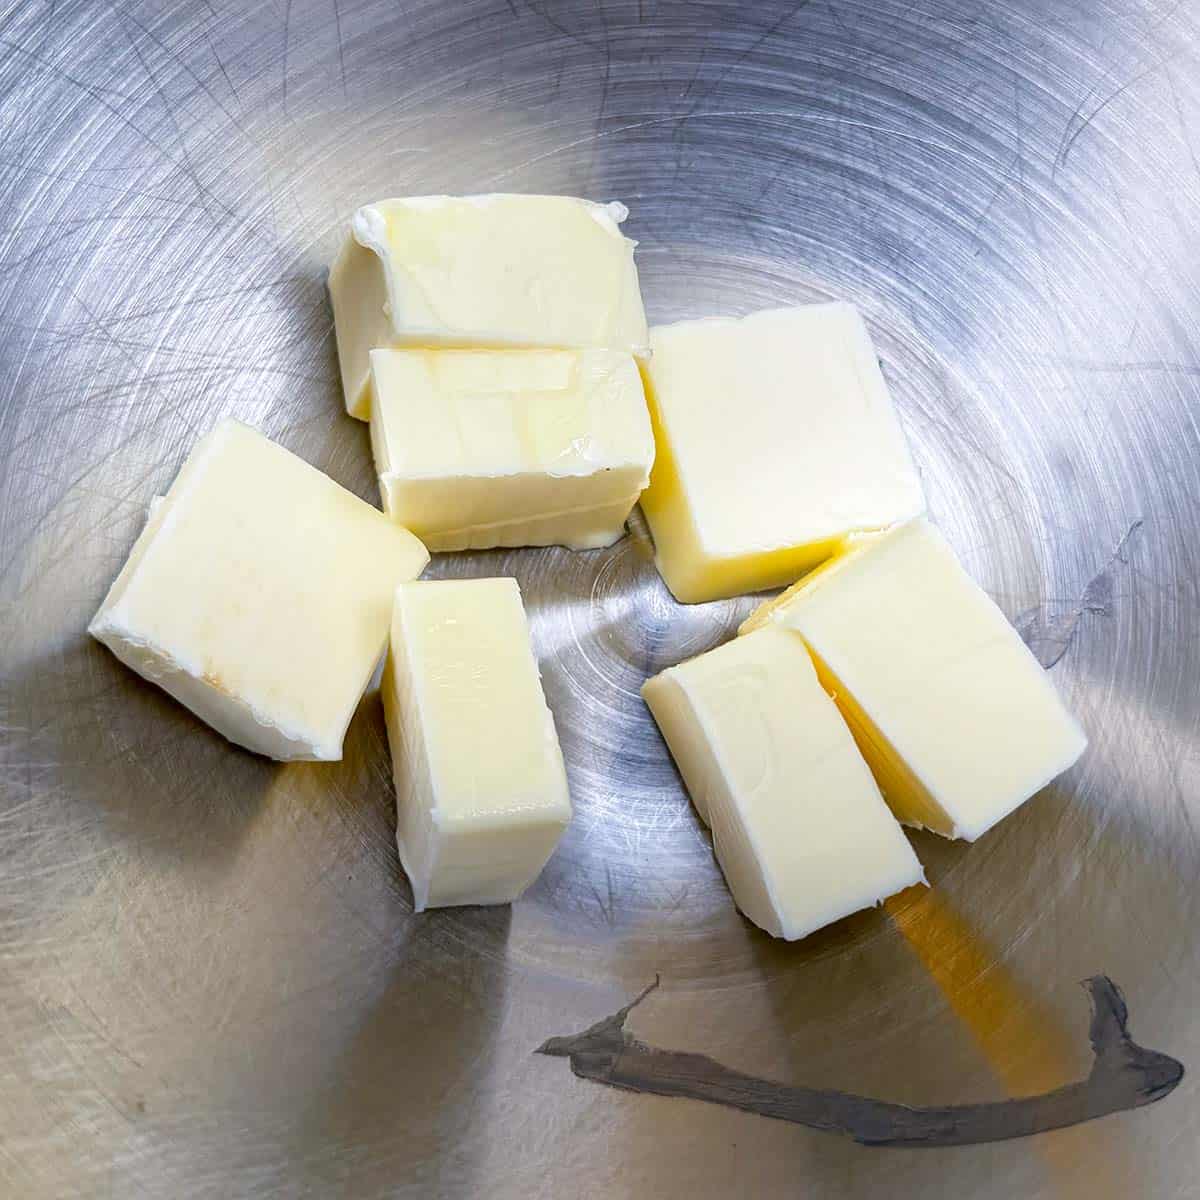 Butter cut into cubes so it can be creamed in a mixer.